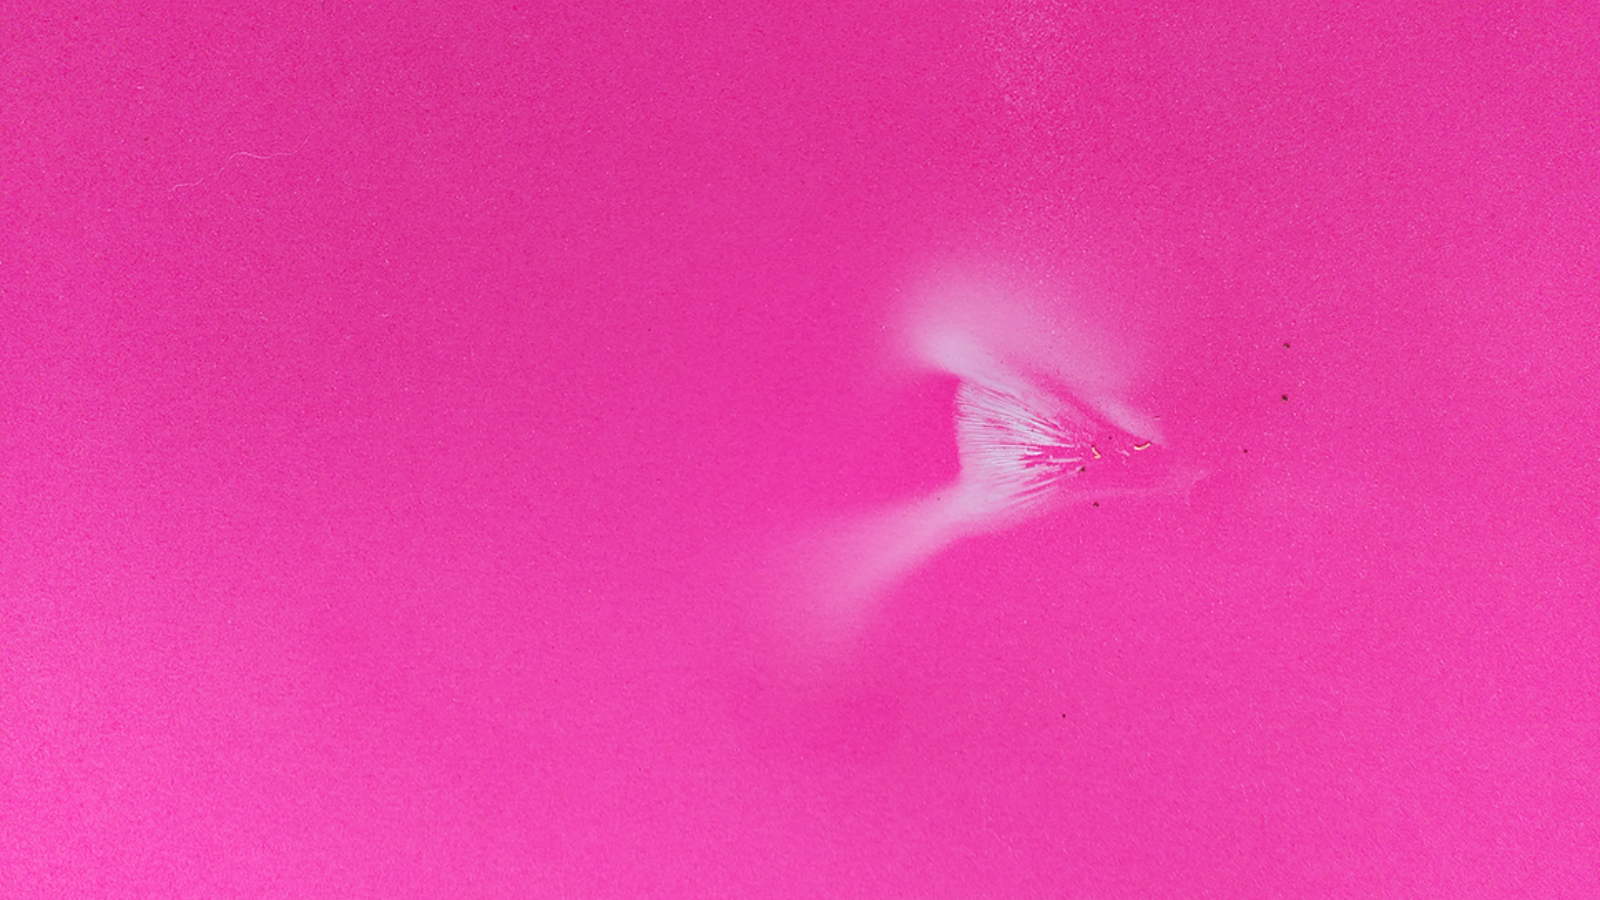 A hot pink grainy image of something natural and abstract.